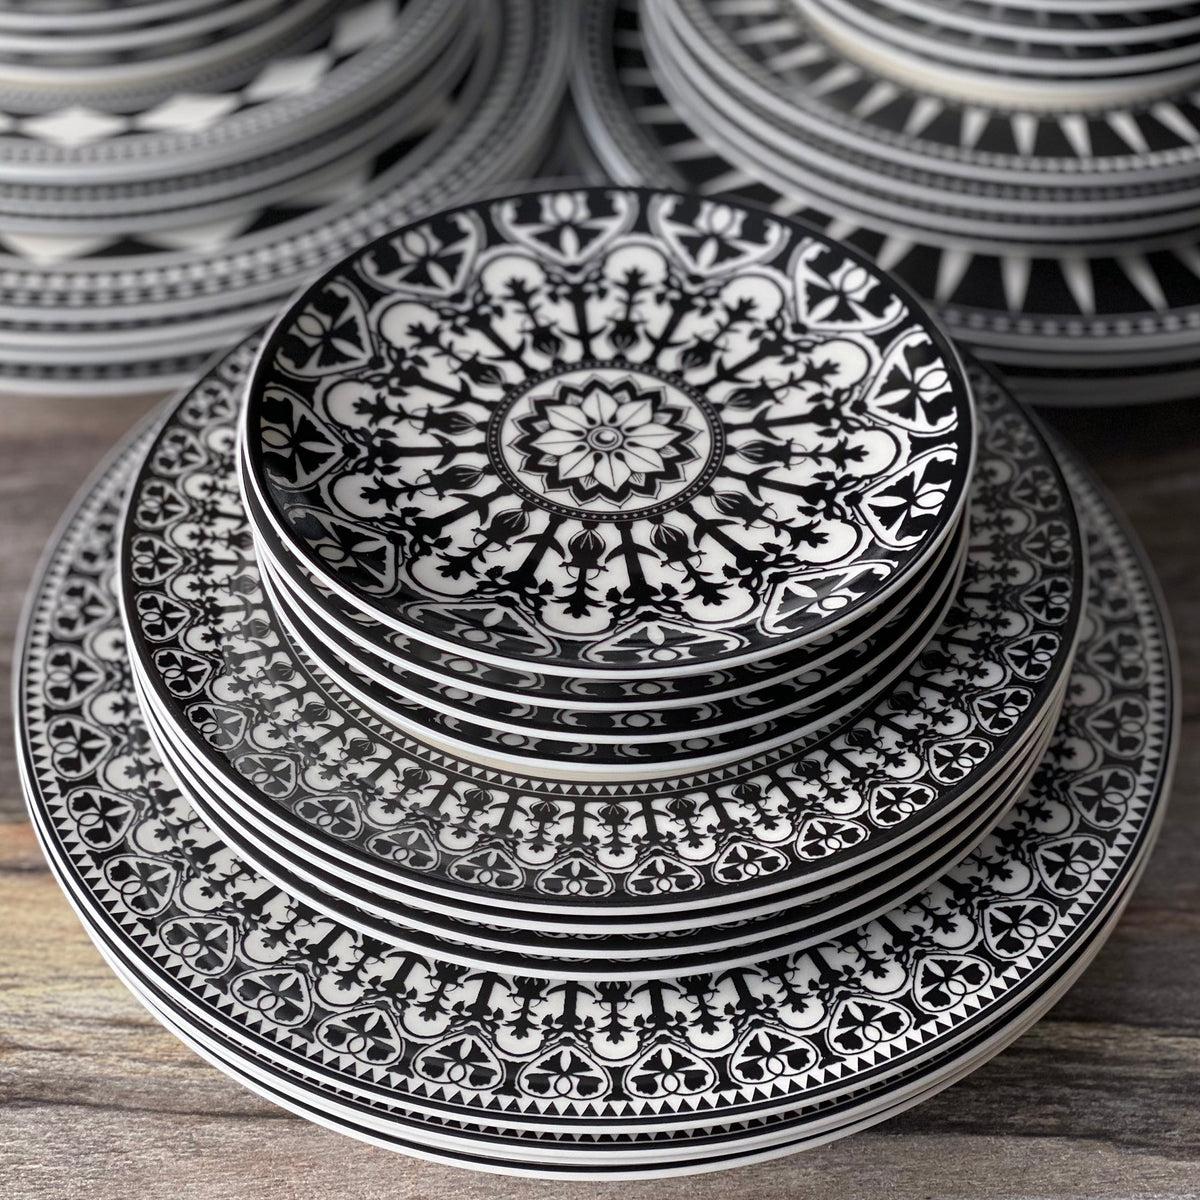 The Geometrics Collection features a stunning display of Caskata Artisanal Home Casablanca Salad Plates, creatively stacked in black and white.